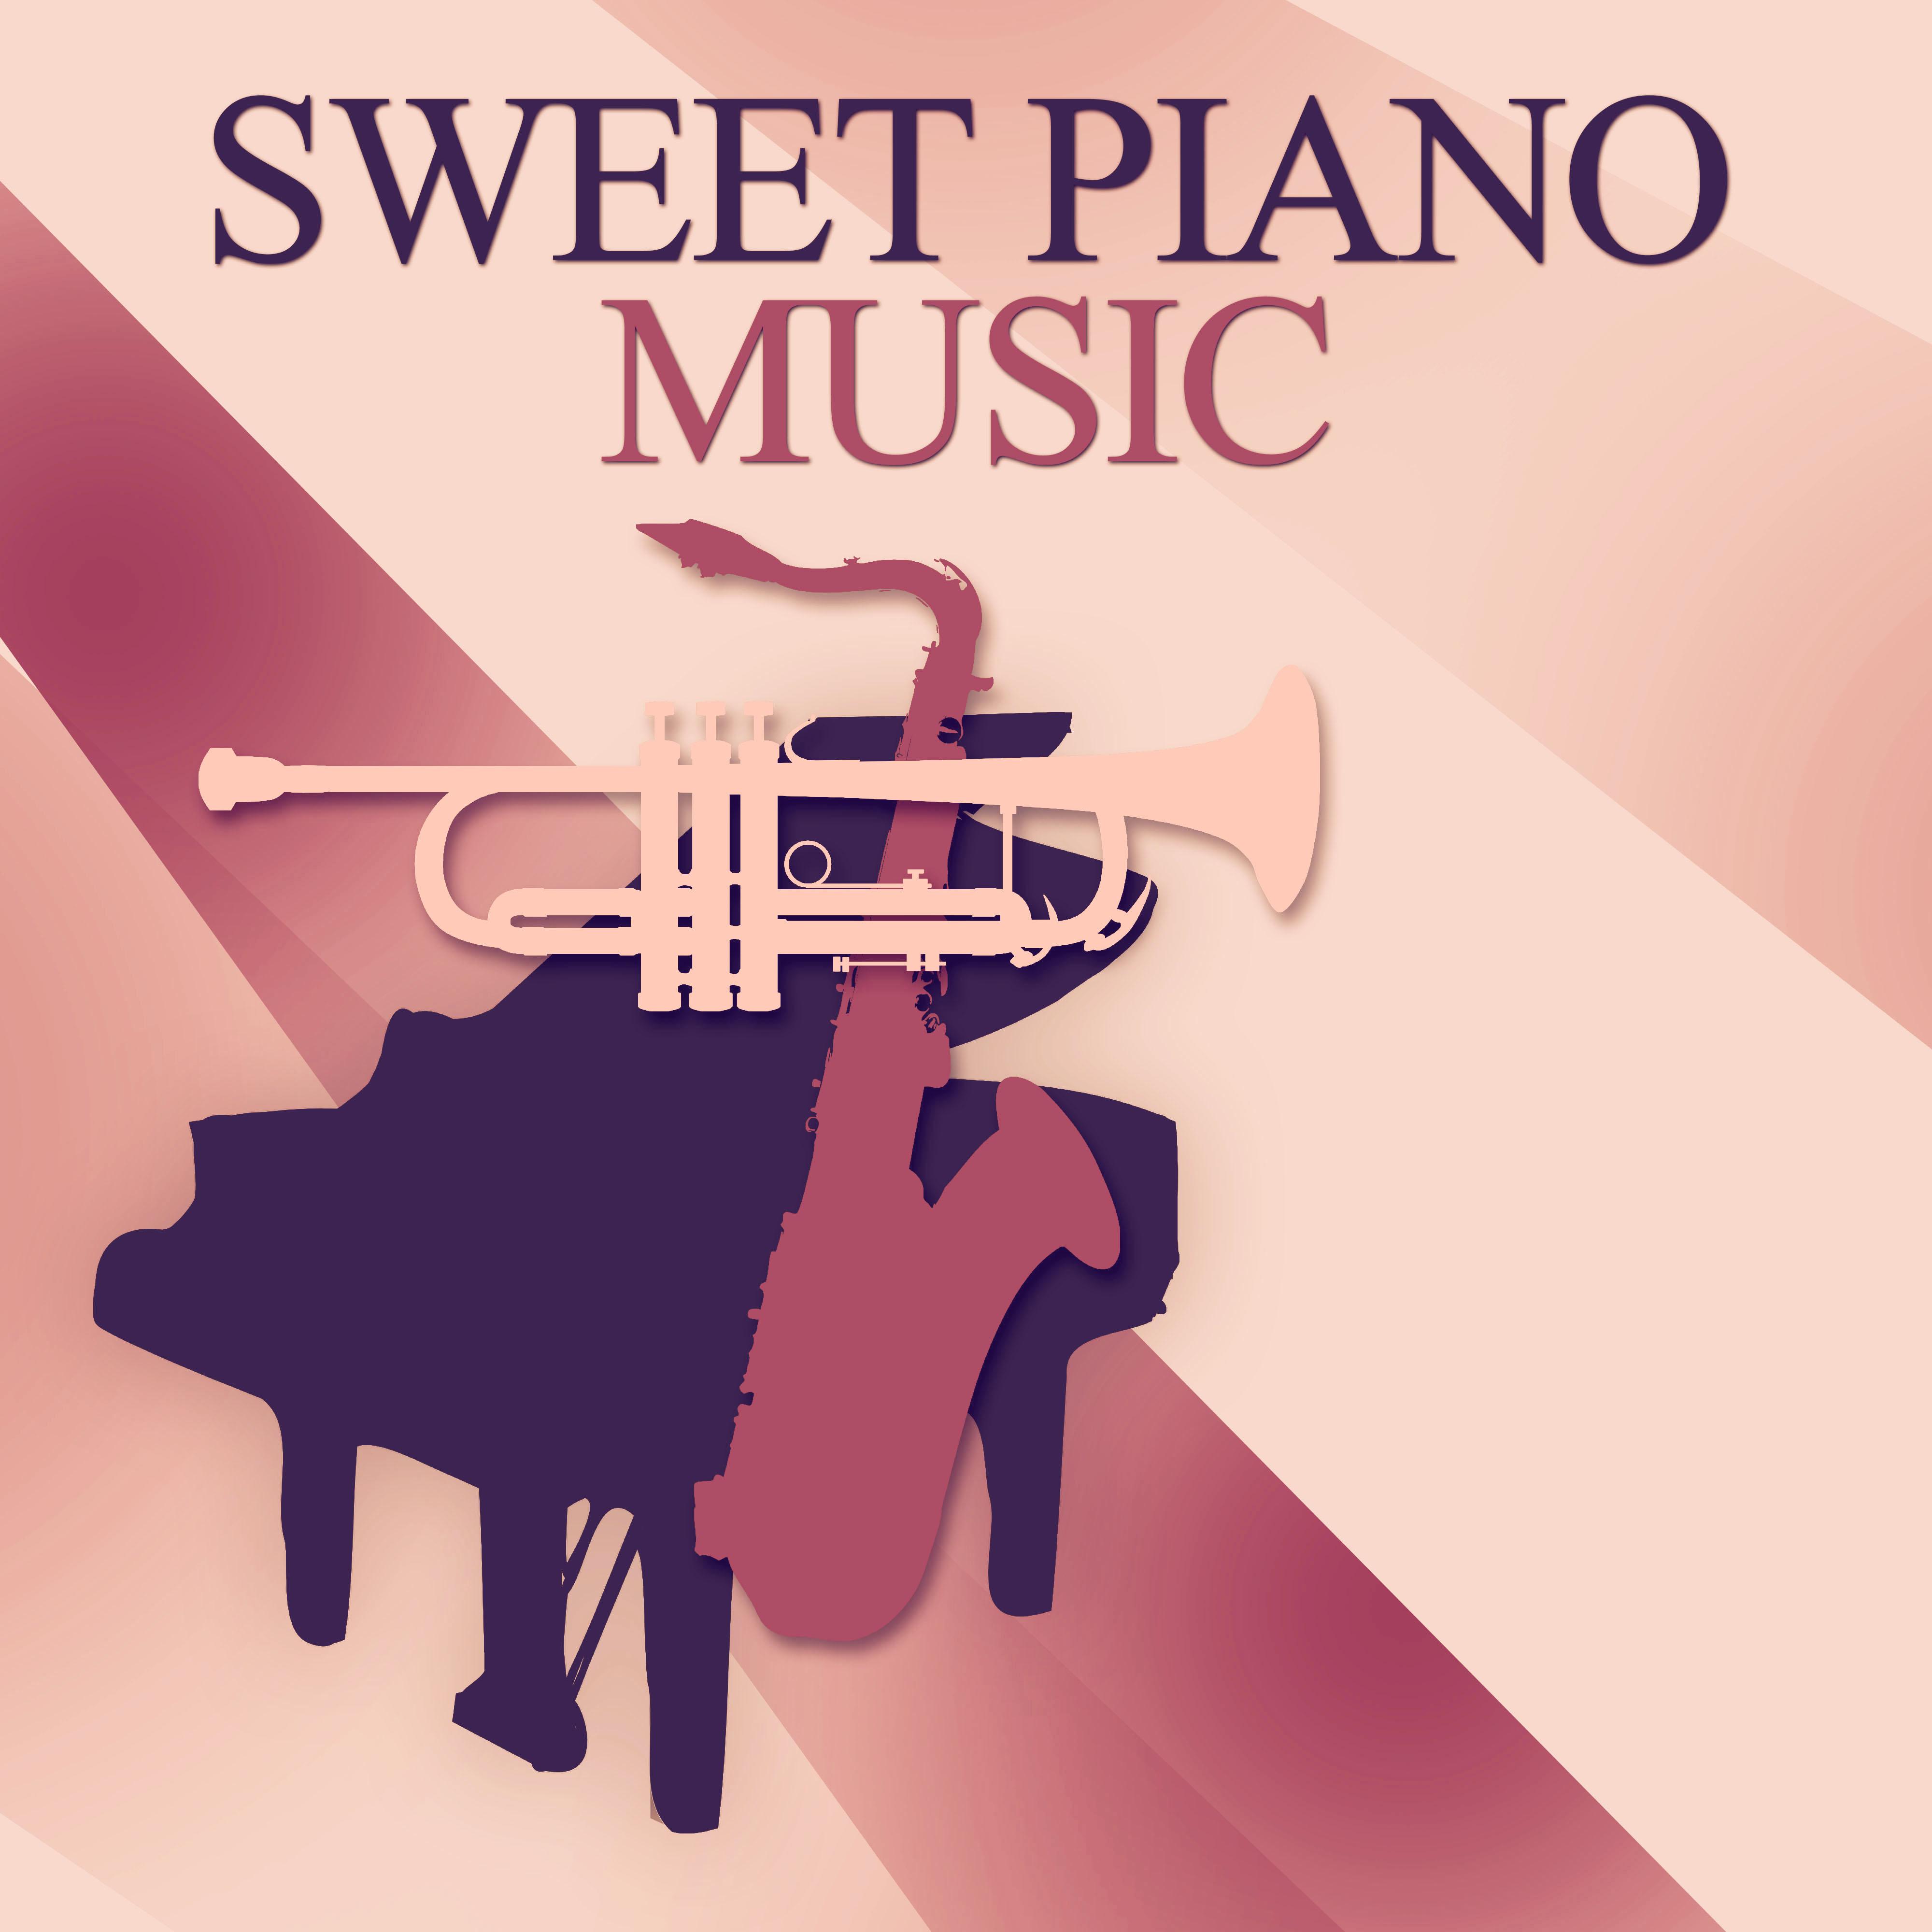 Sweet Piano Music – Swing Jazz Sounds for Cocktail Party, Instrumental Sounds with Positive Energy, Cafe Jazz, Simple and Beautiful